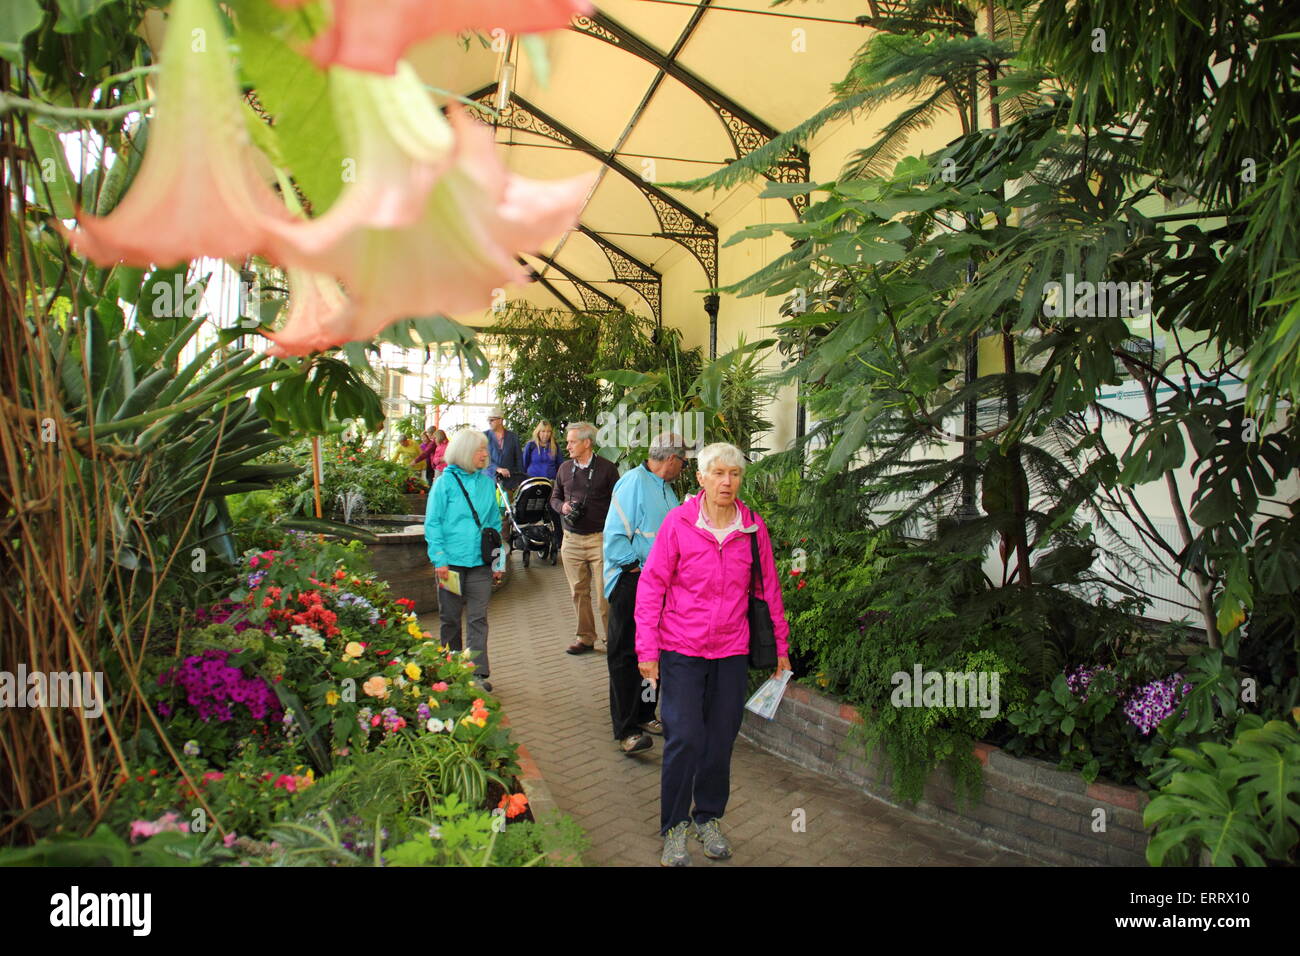 Visitors survey the floral displays in the Pavilions Gardens hothouse at Buxton in Derbyshire, England UK  - summer Stock Photo